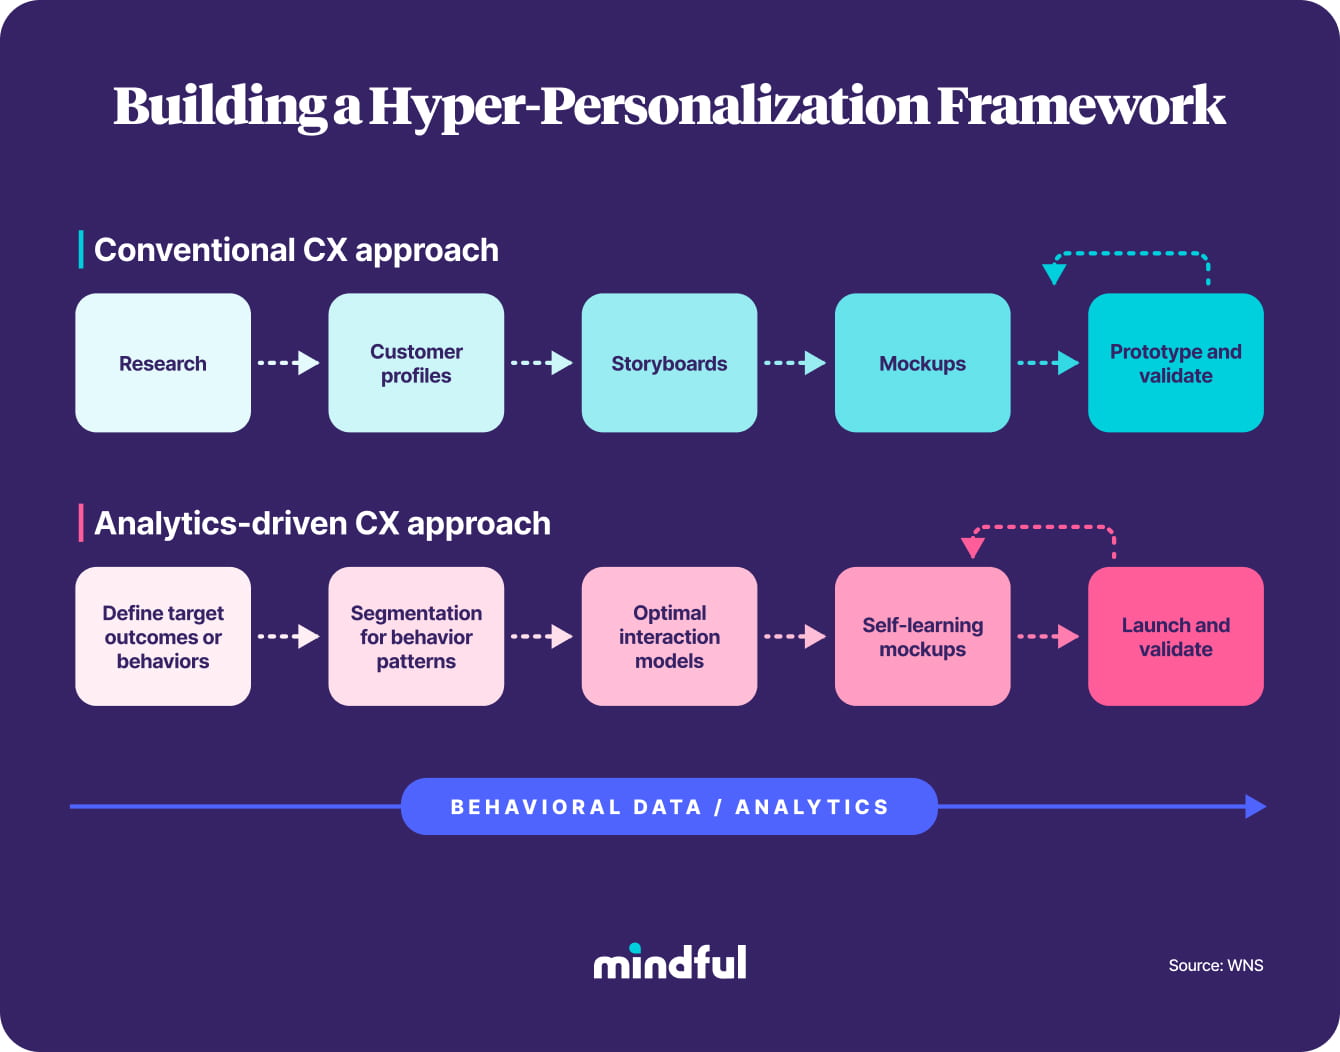 Flow chart titled "Building a Hyper-Personalization Framework" that shows the difference in steps between a conventional approach and an analytics-focused approach